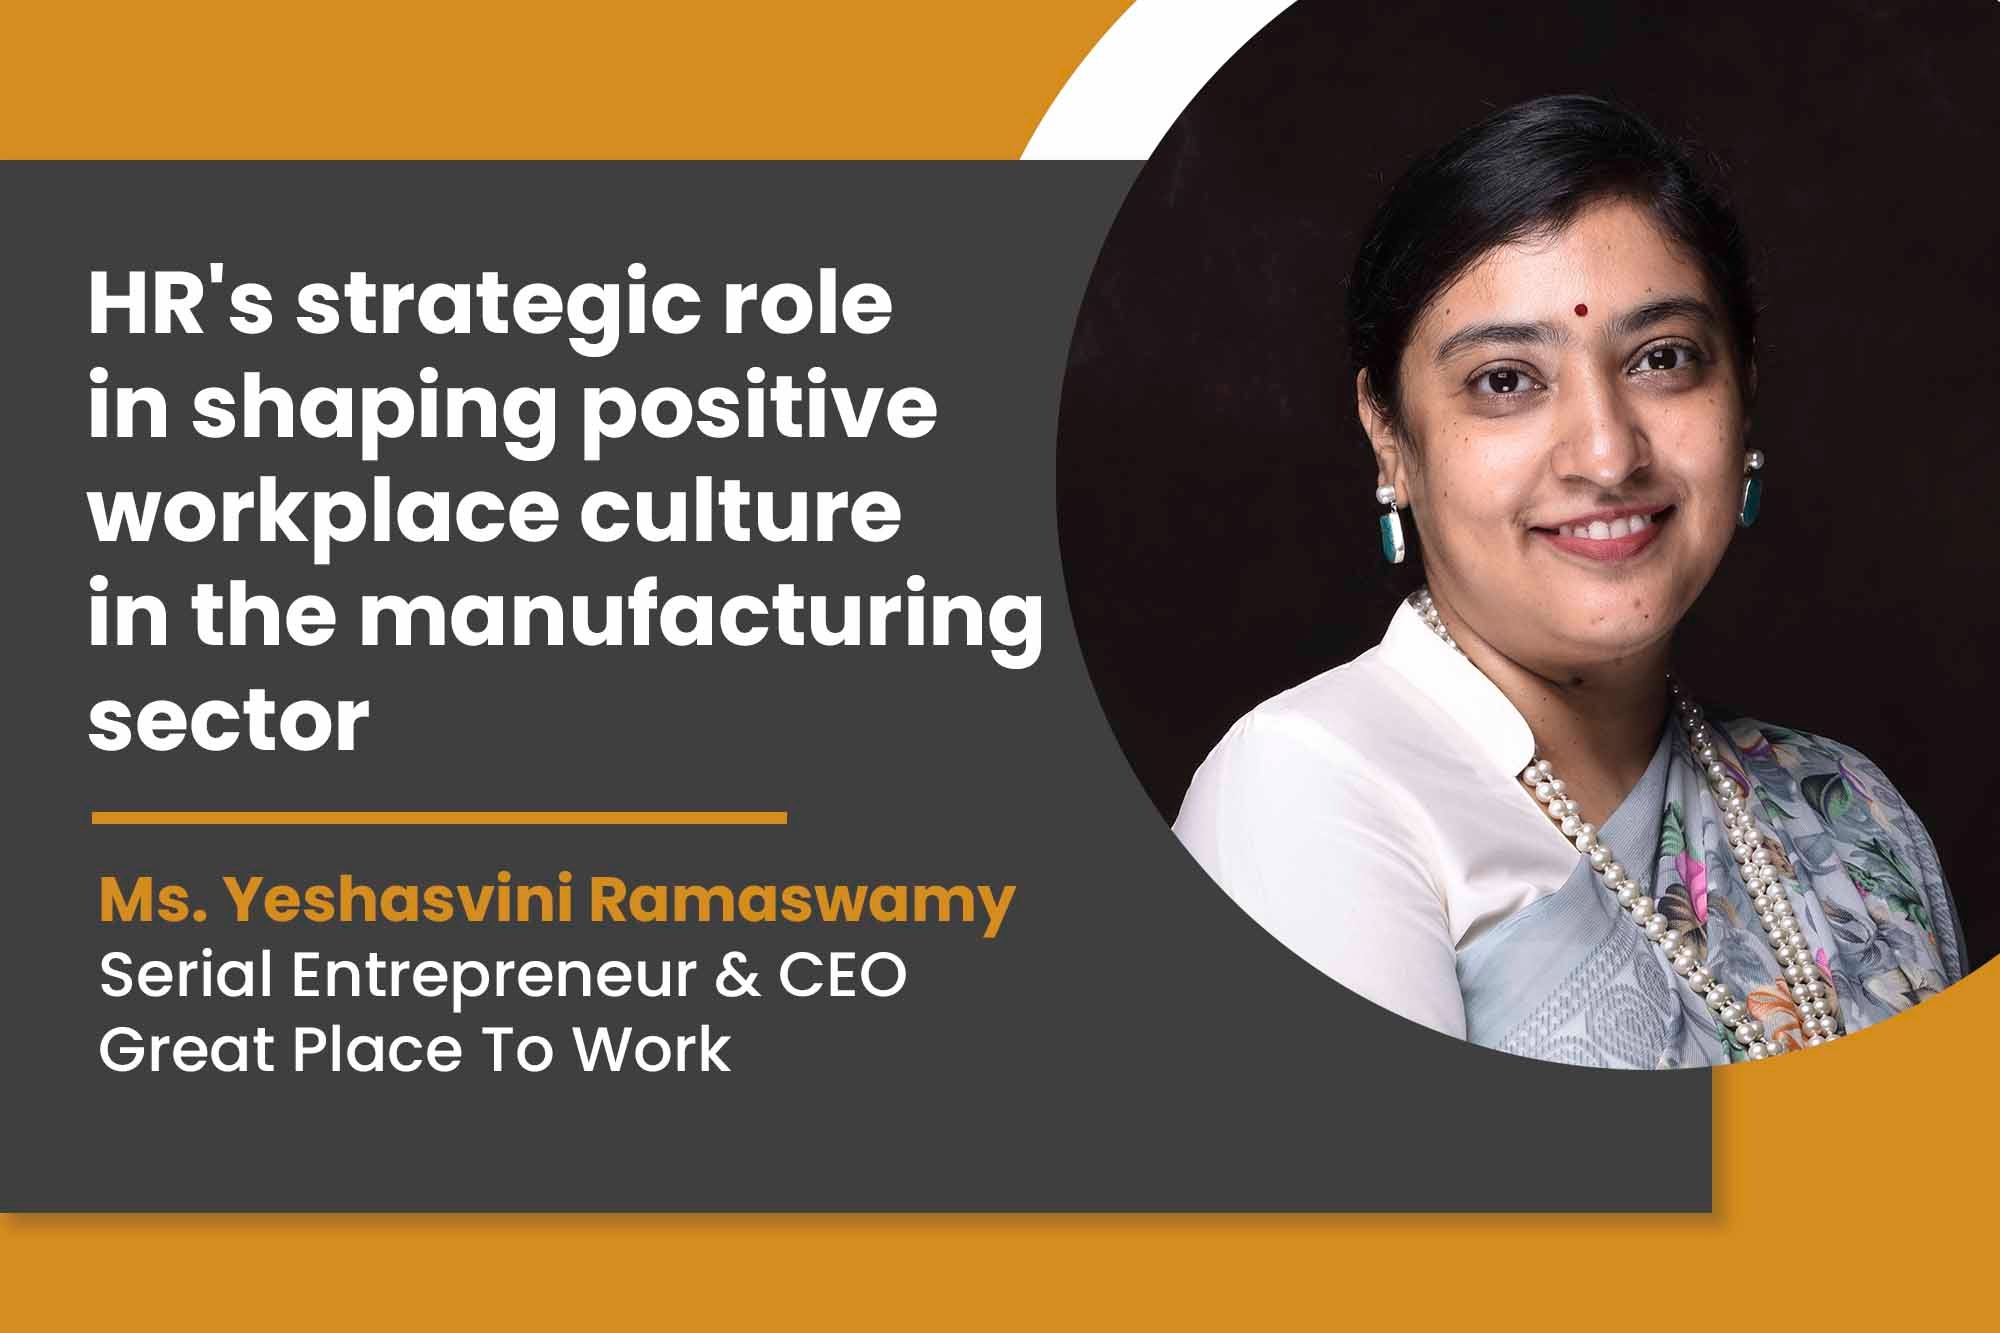 HR’s strategic role in shaping positive workplace culture in the manufacturing sector